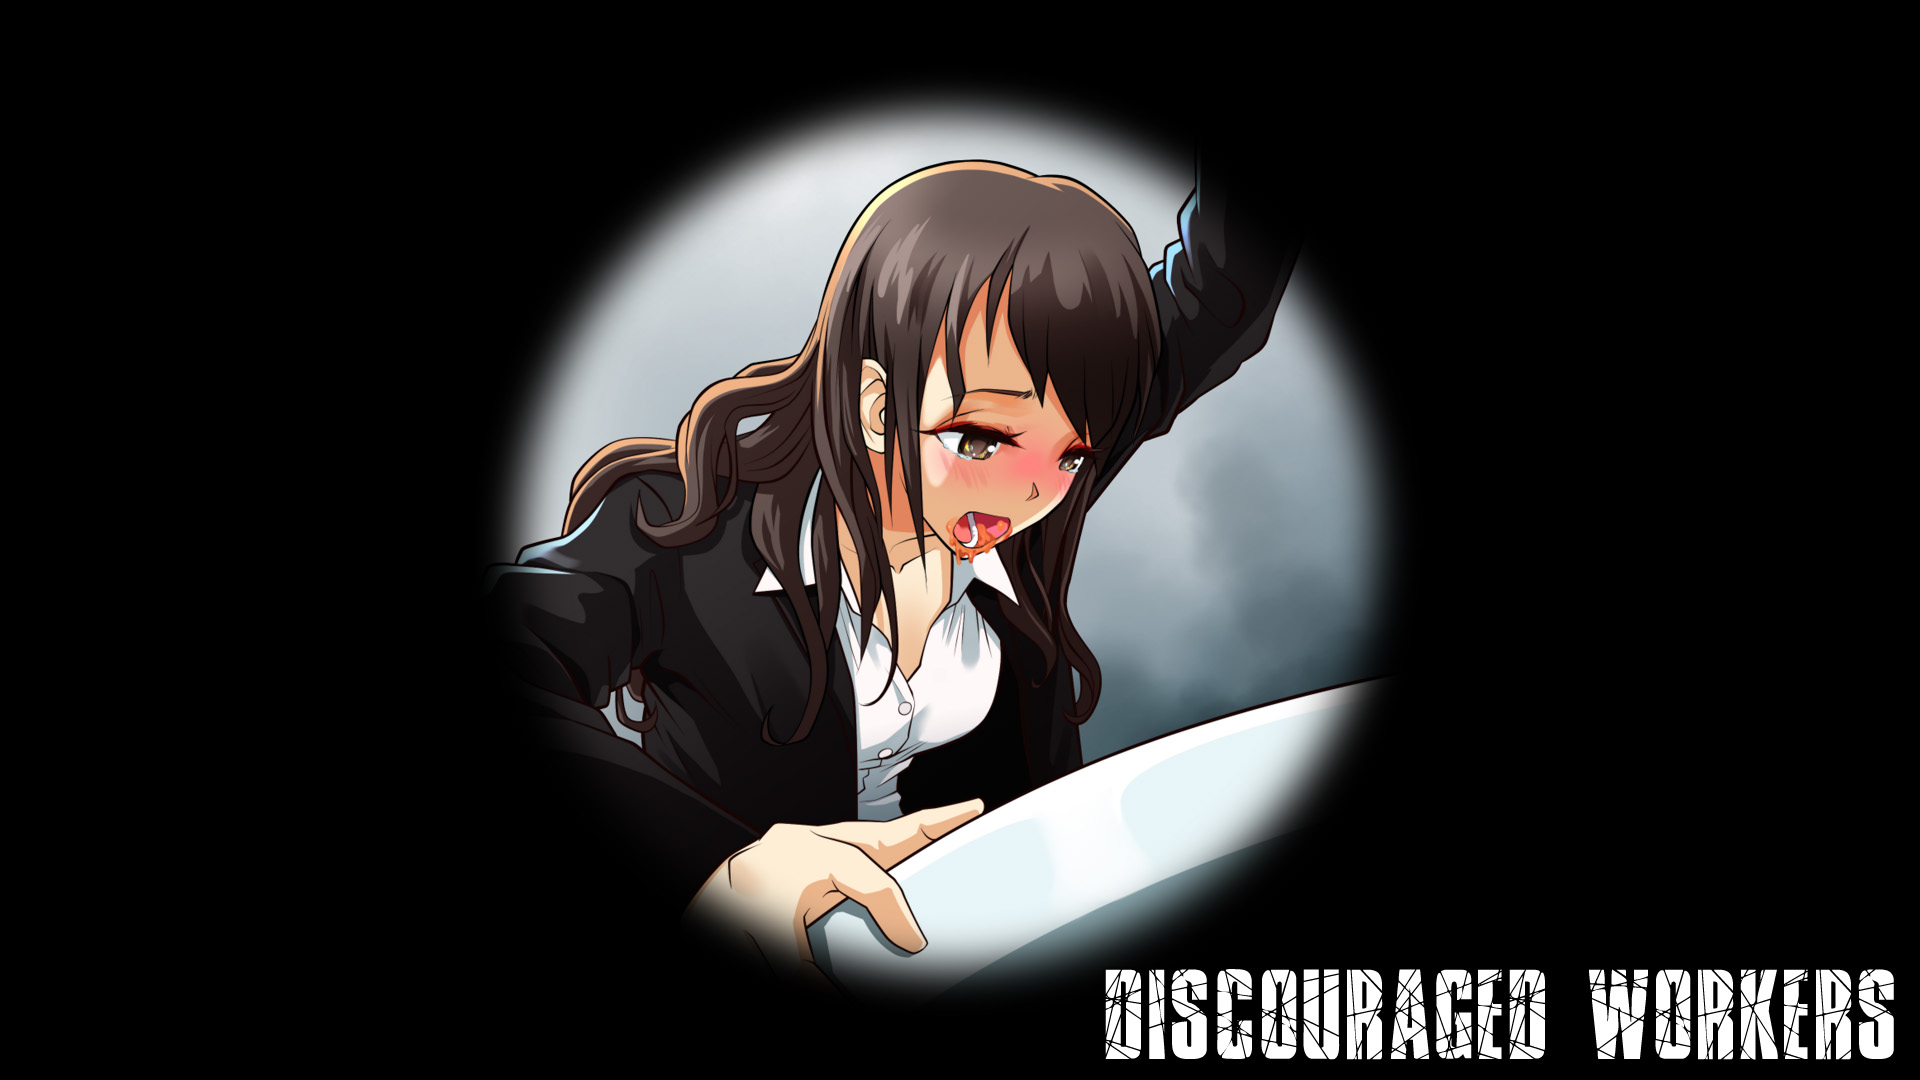 Discouraged Workers Wallpapers